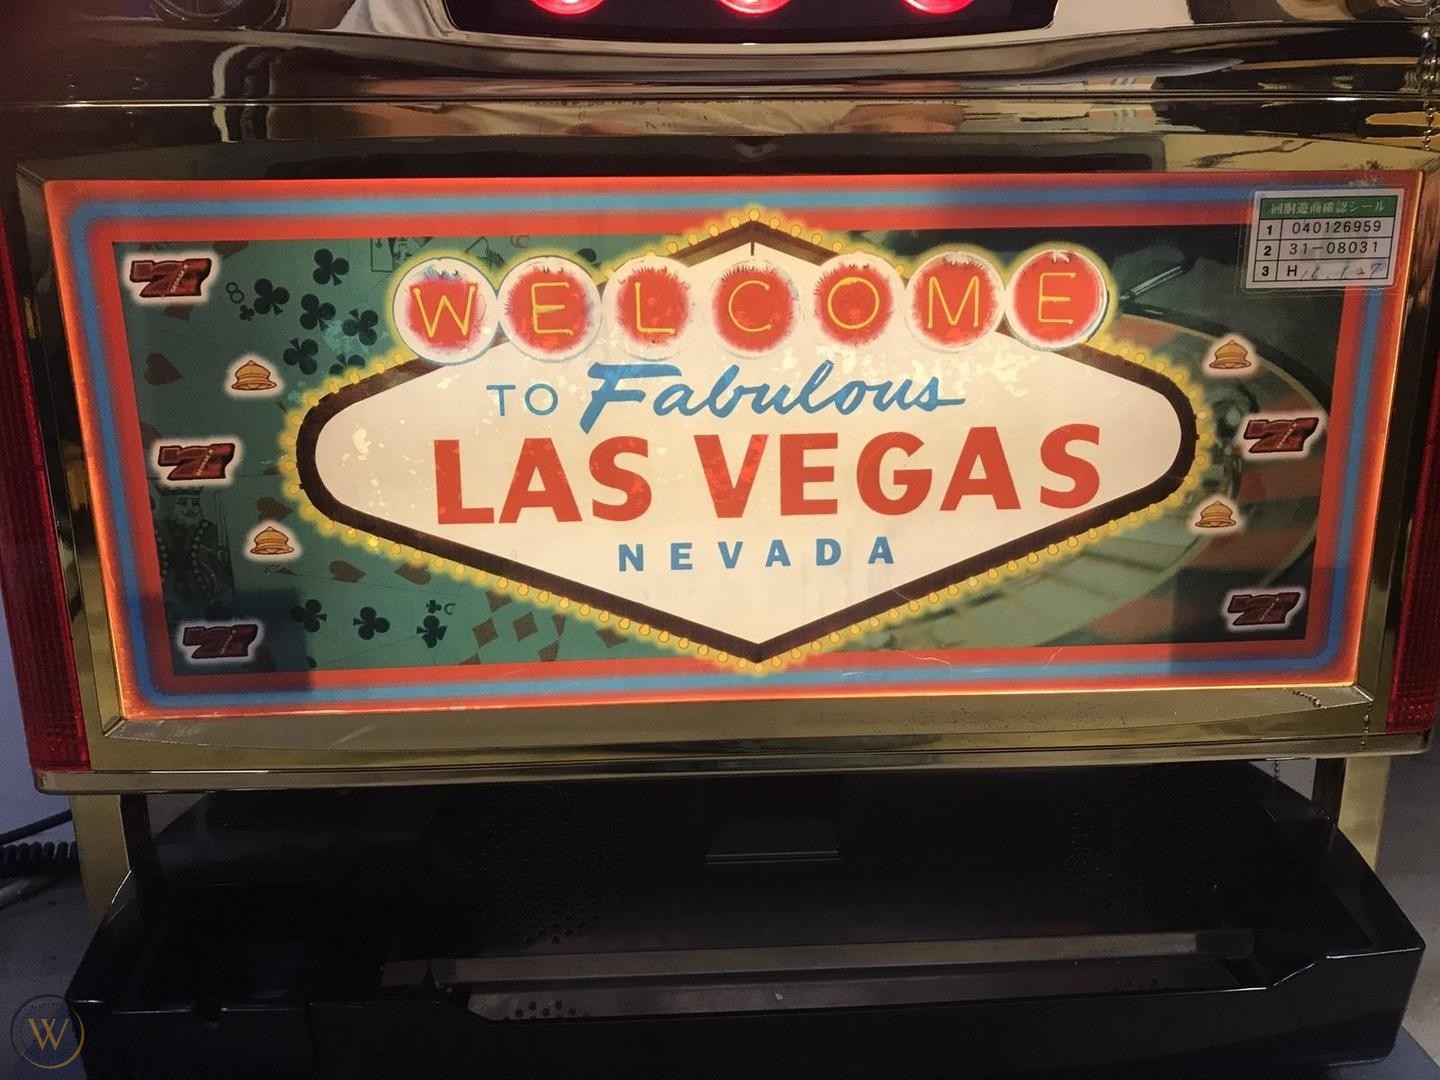 A Review of the Las Vegas Skill Stop Slot Machine